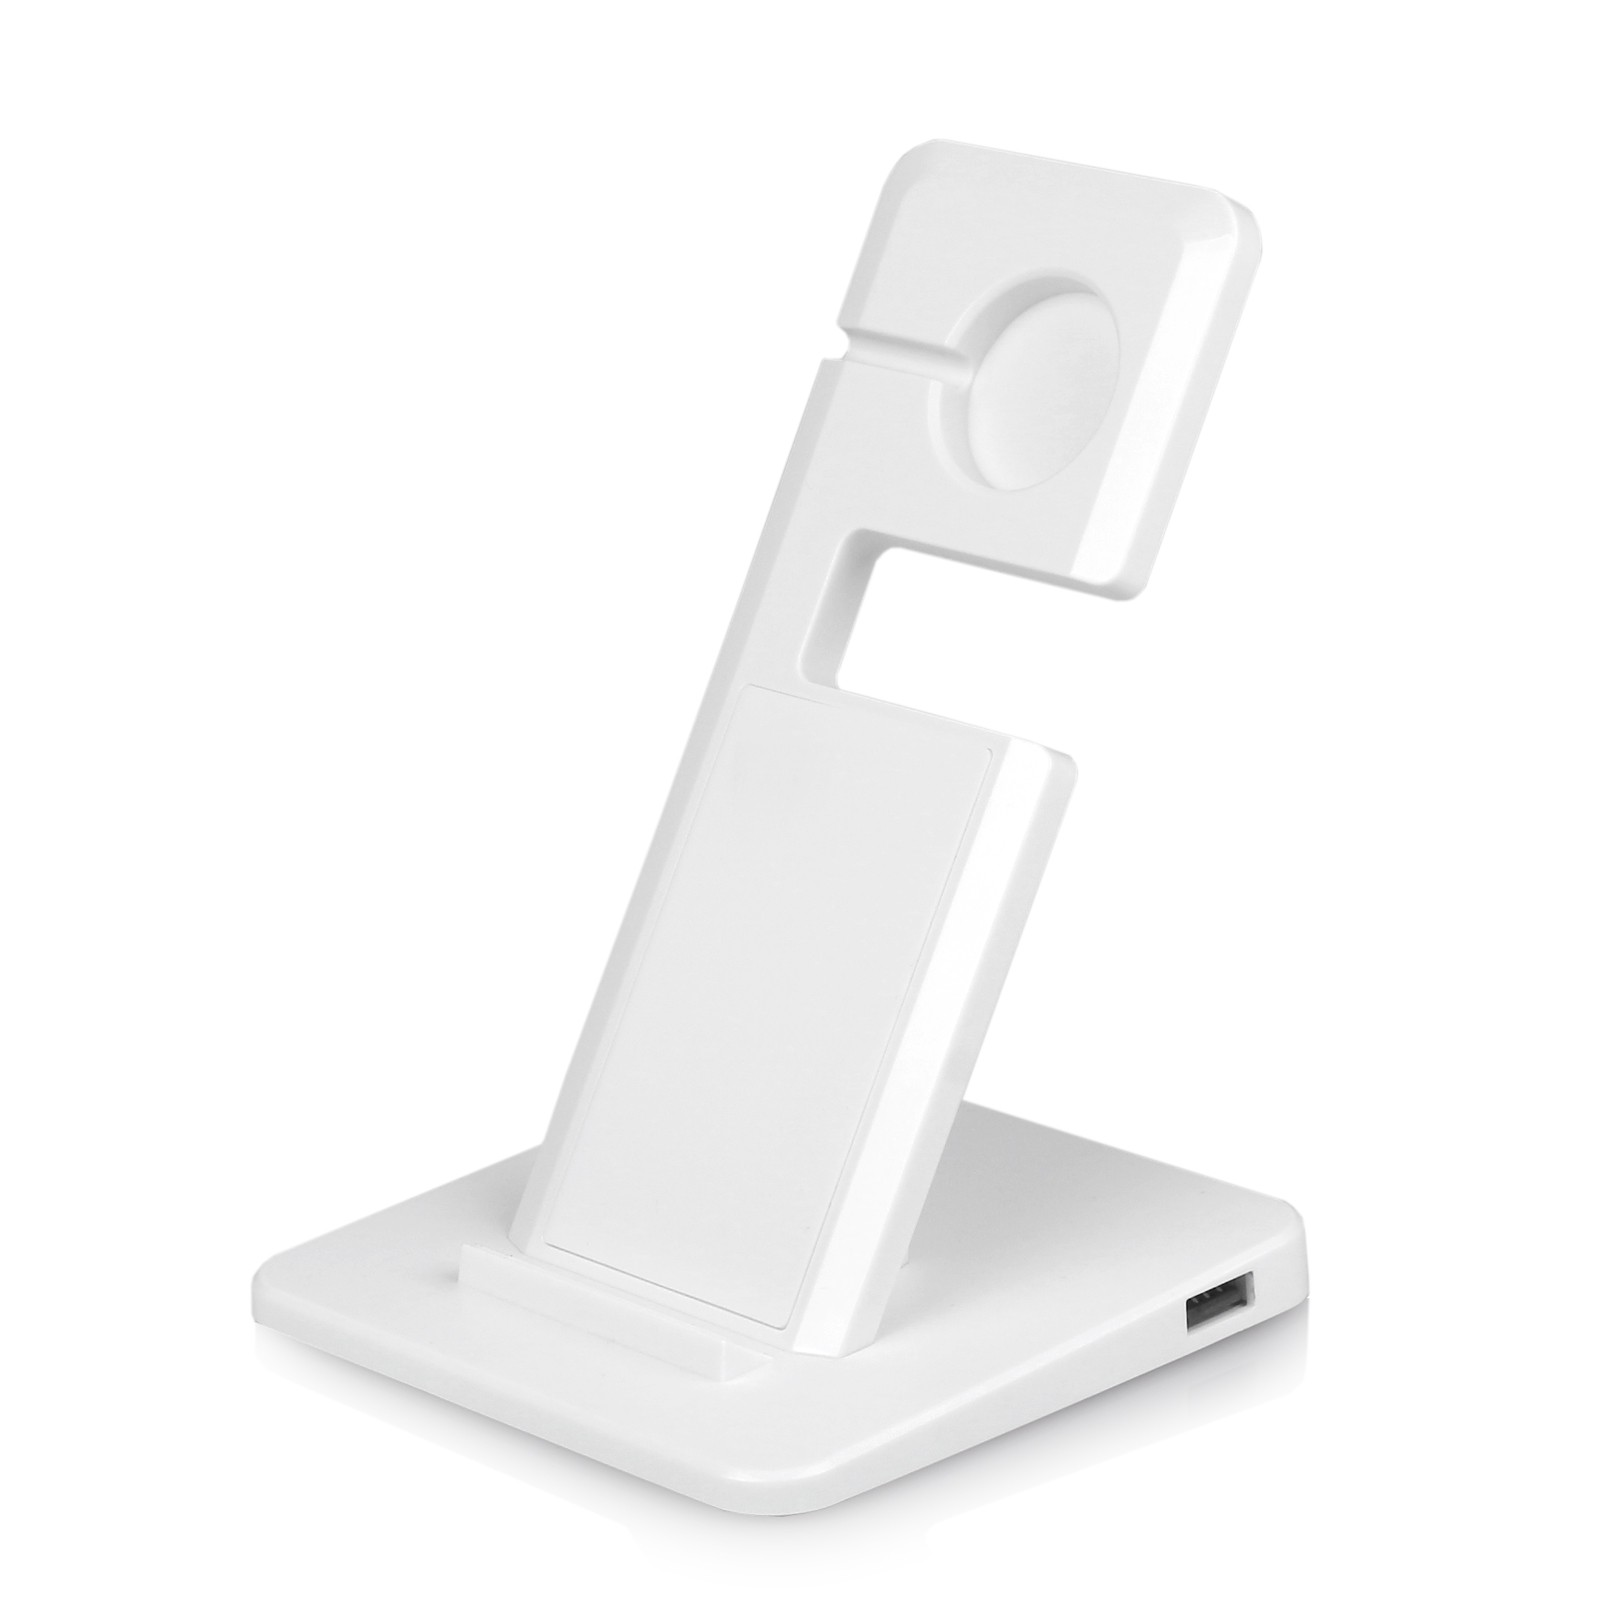 IN STOCK For Iphone Apple Watch USB Charging Dock Stand Holder Charger Desktop Station for iPhone 5 5s 6 Plus iPad